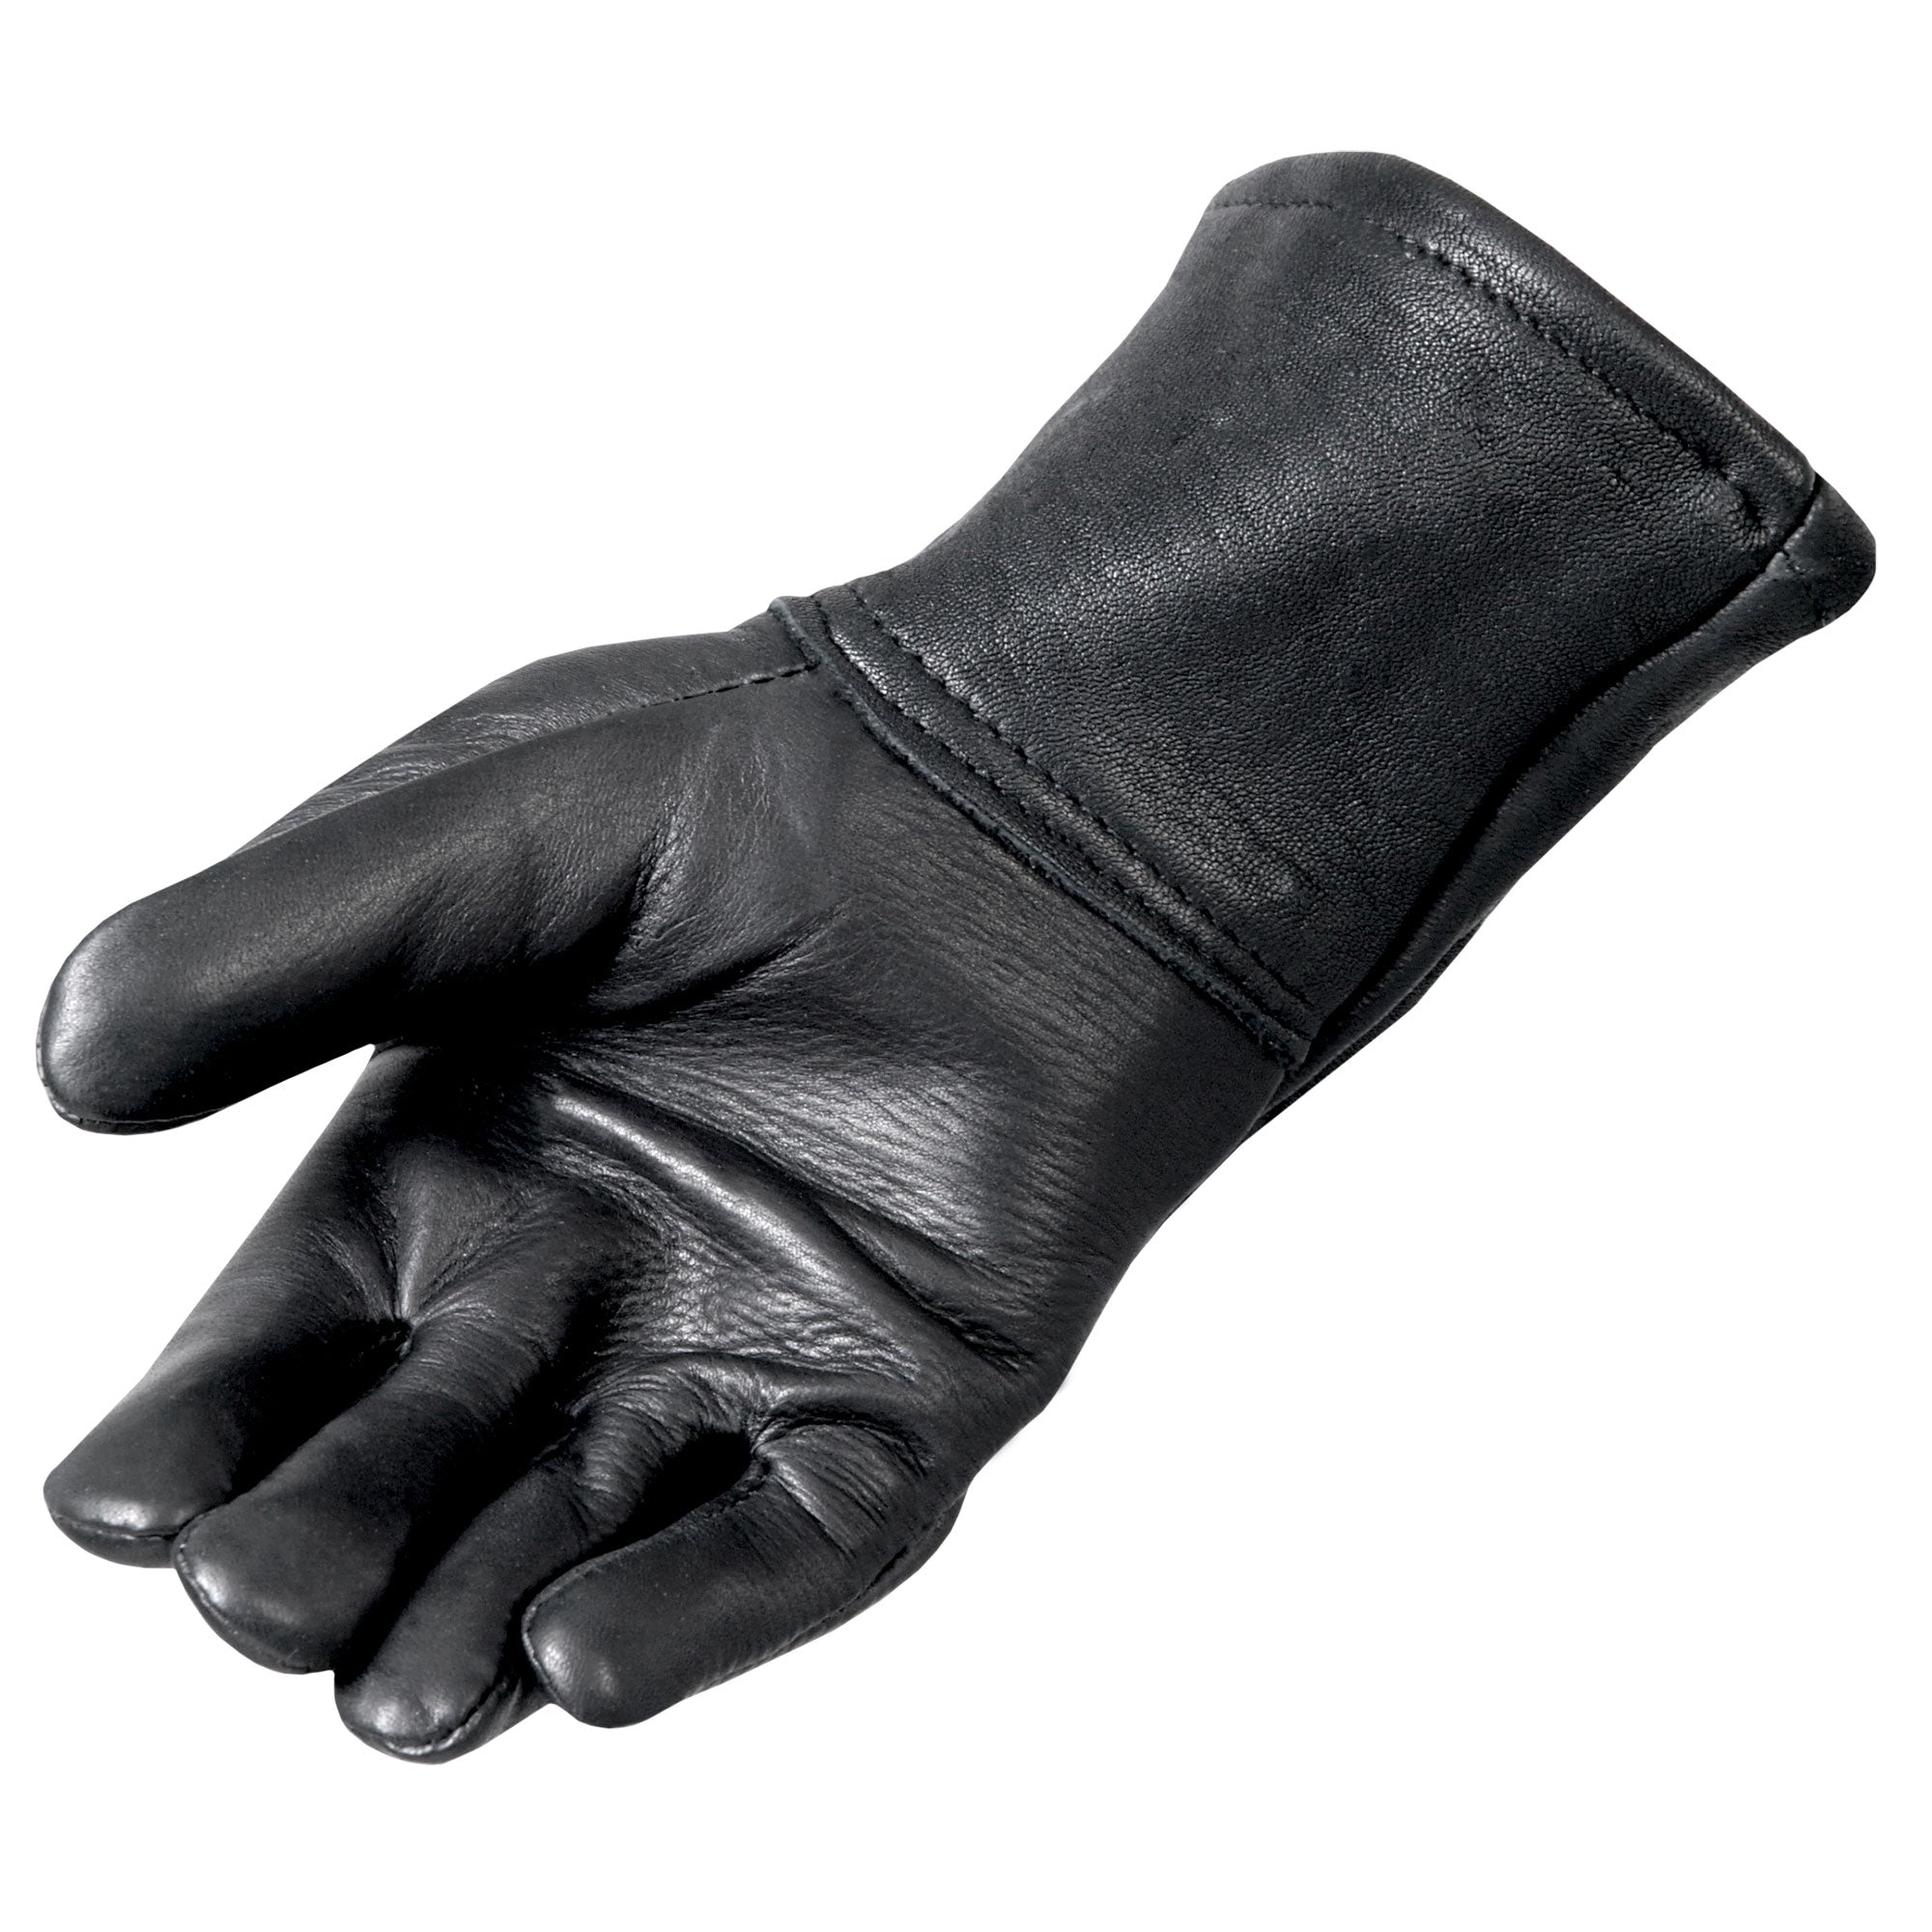 Hot Leathers GVD1003 Classic Deerskin Thinsulate Lining Gauntlet Glove